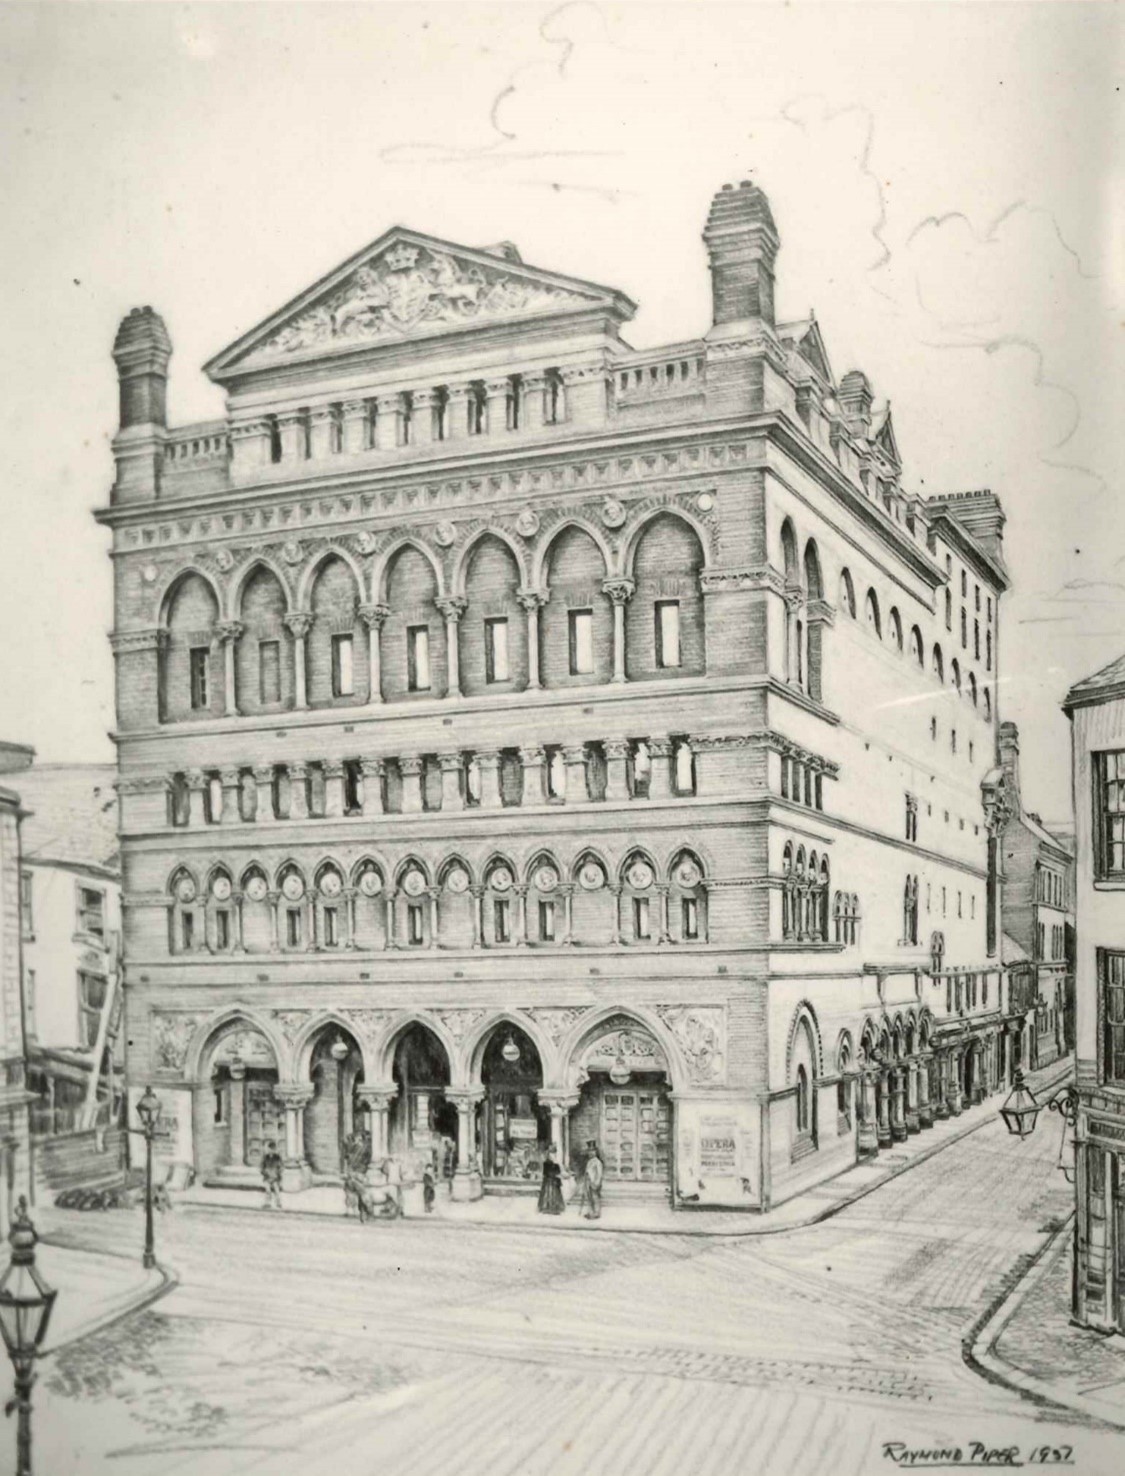 A drawing for the final performances in the Old Theatre before it was demolished in March 1871